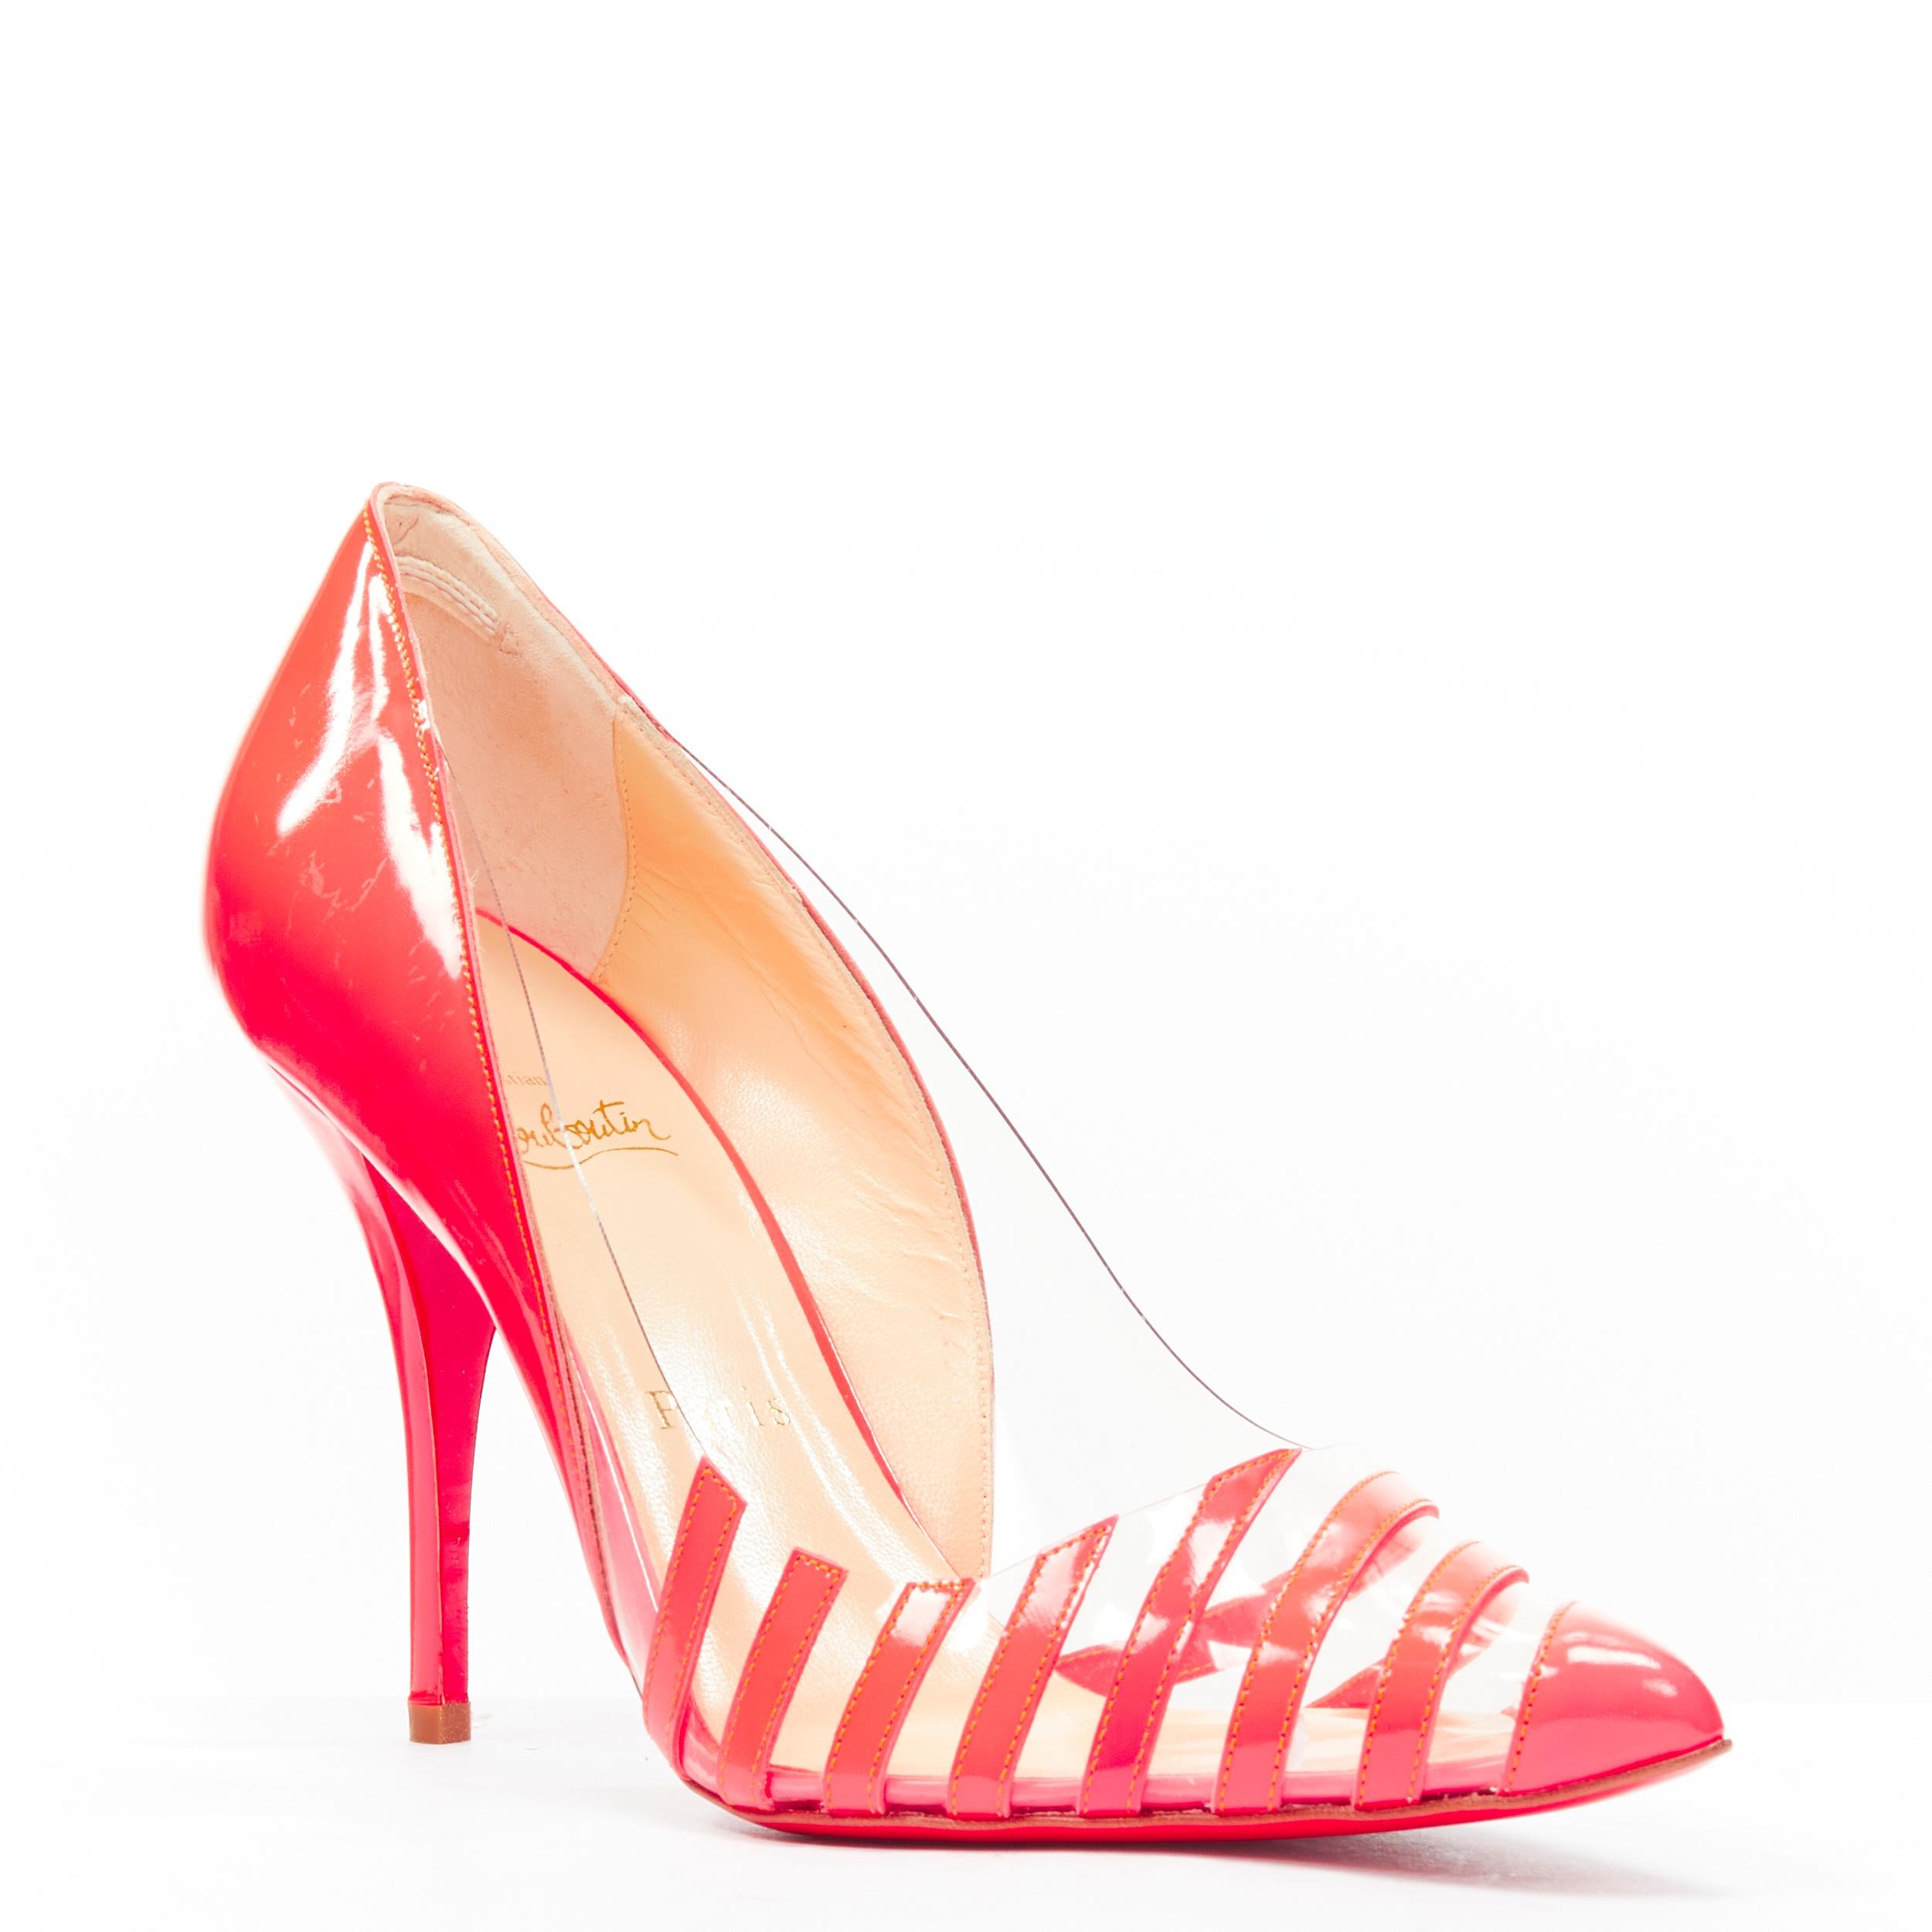 CHRISTIAN LOUBOUTIN Pivichic 100 neon pink striped patent pigalle pump EU37.5 
Reference: MELK/A00200 
Brand: Christian Louboutin 
Model: Pivichic 100 
Material: Patent Leather 
Color: Pink 
Pattern: Striped 
Made in: Italy 

CONDITION: 
Condition: